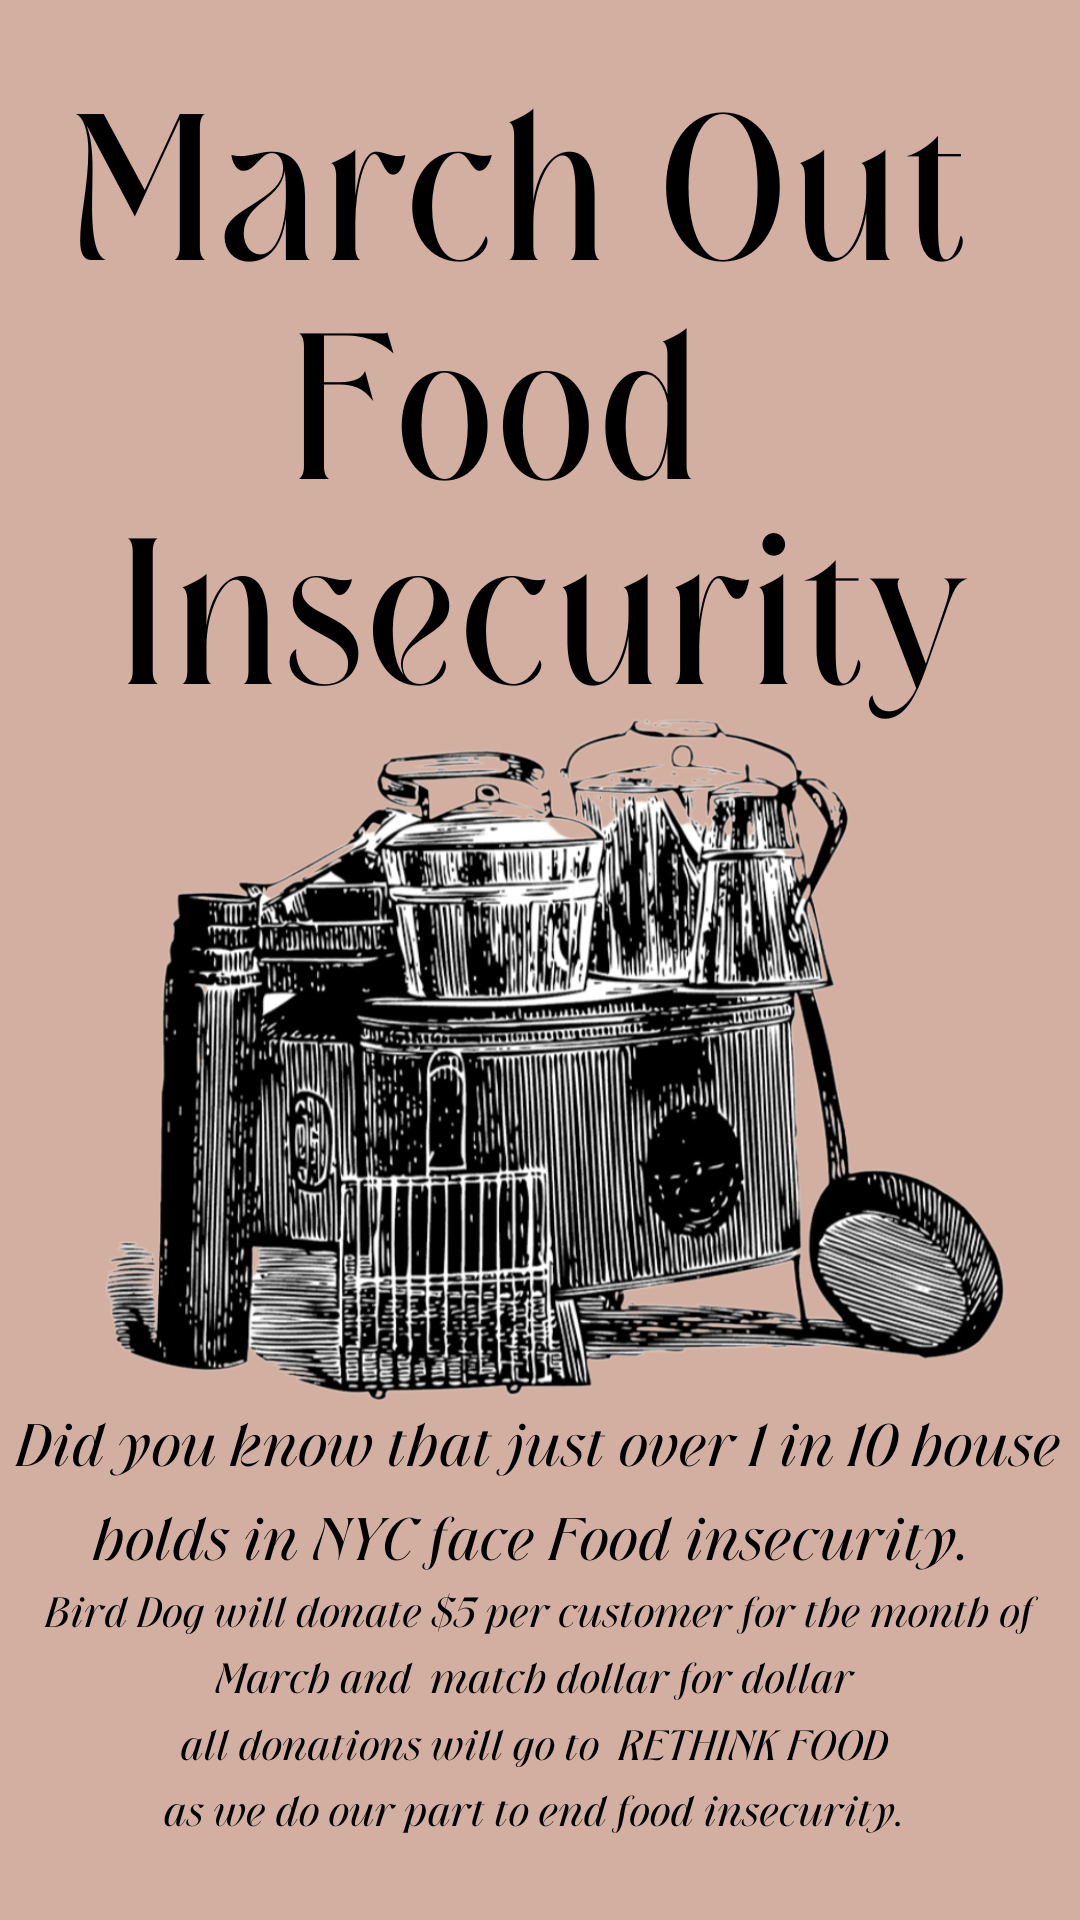 March out food insecurity 